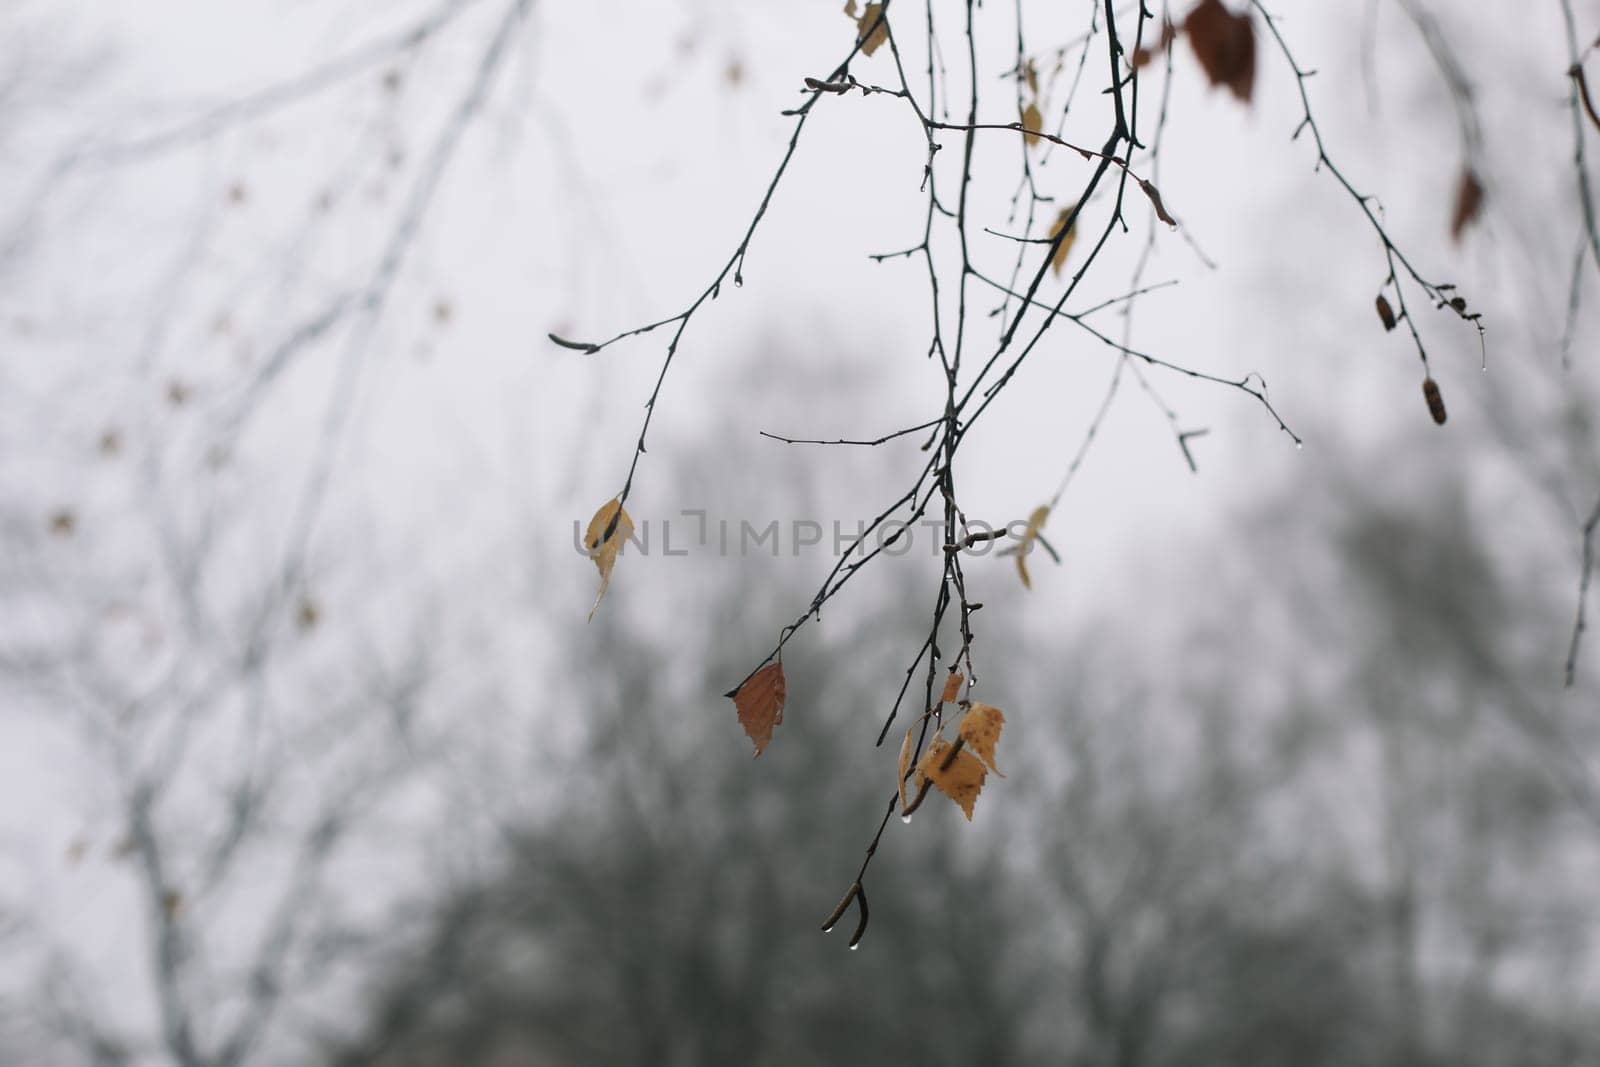 Tree crown without leaves, bare branches, winter. High quality photo. Branch of autumn tree against the sky. Beautiful autumn frame